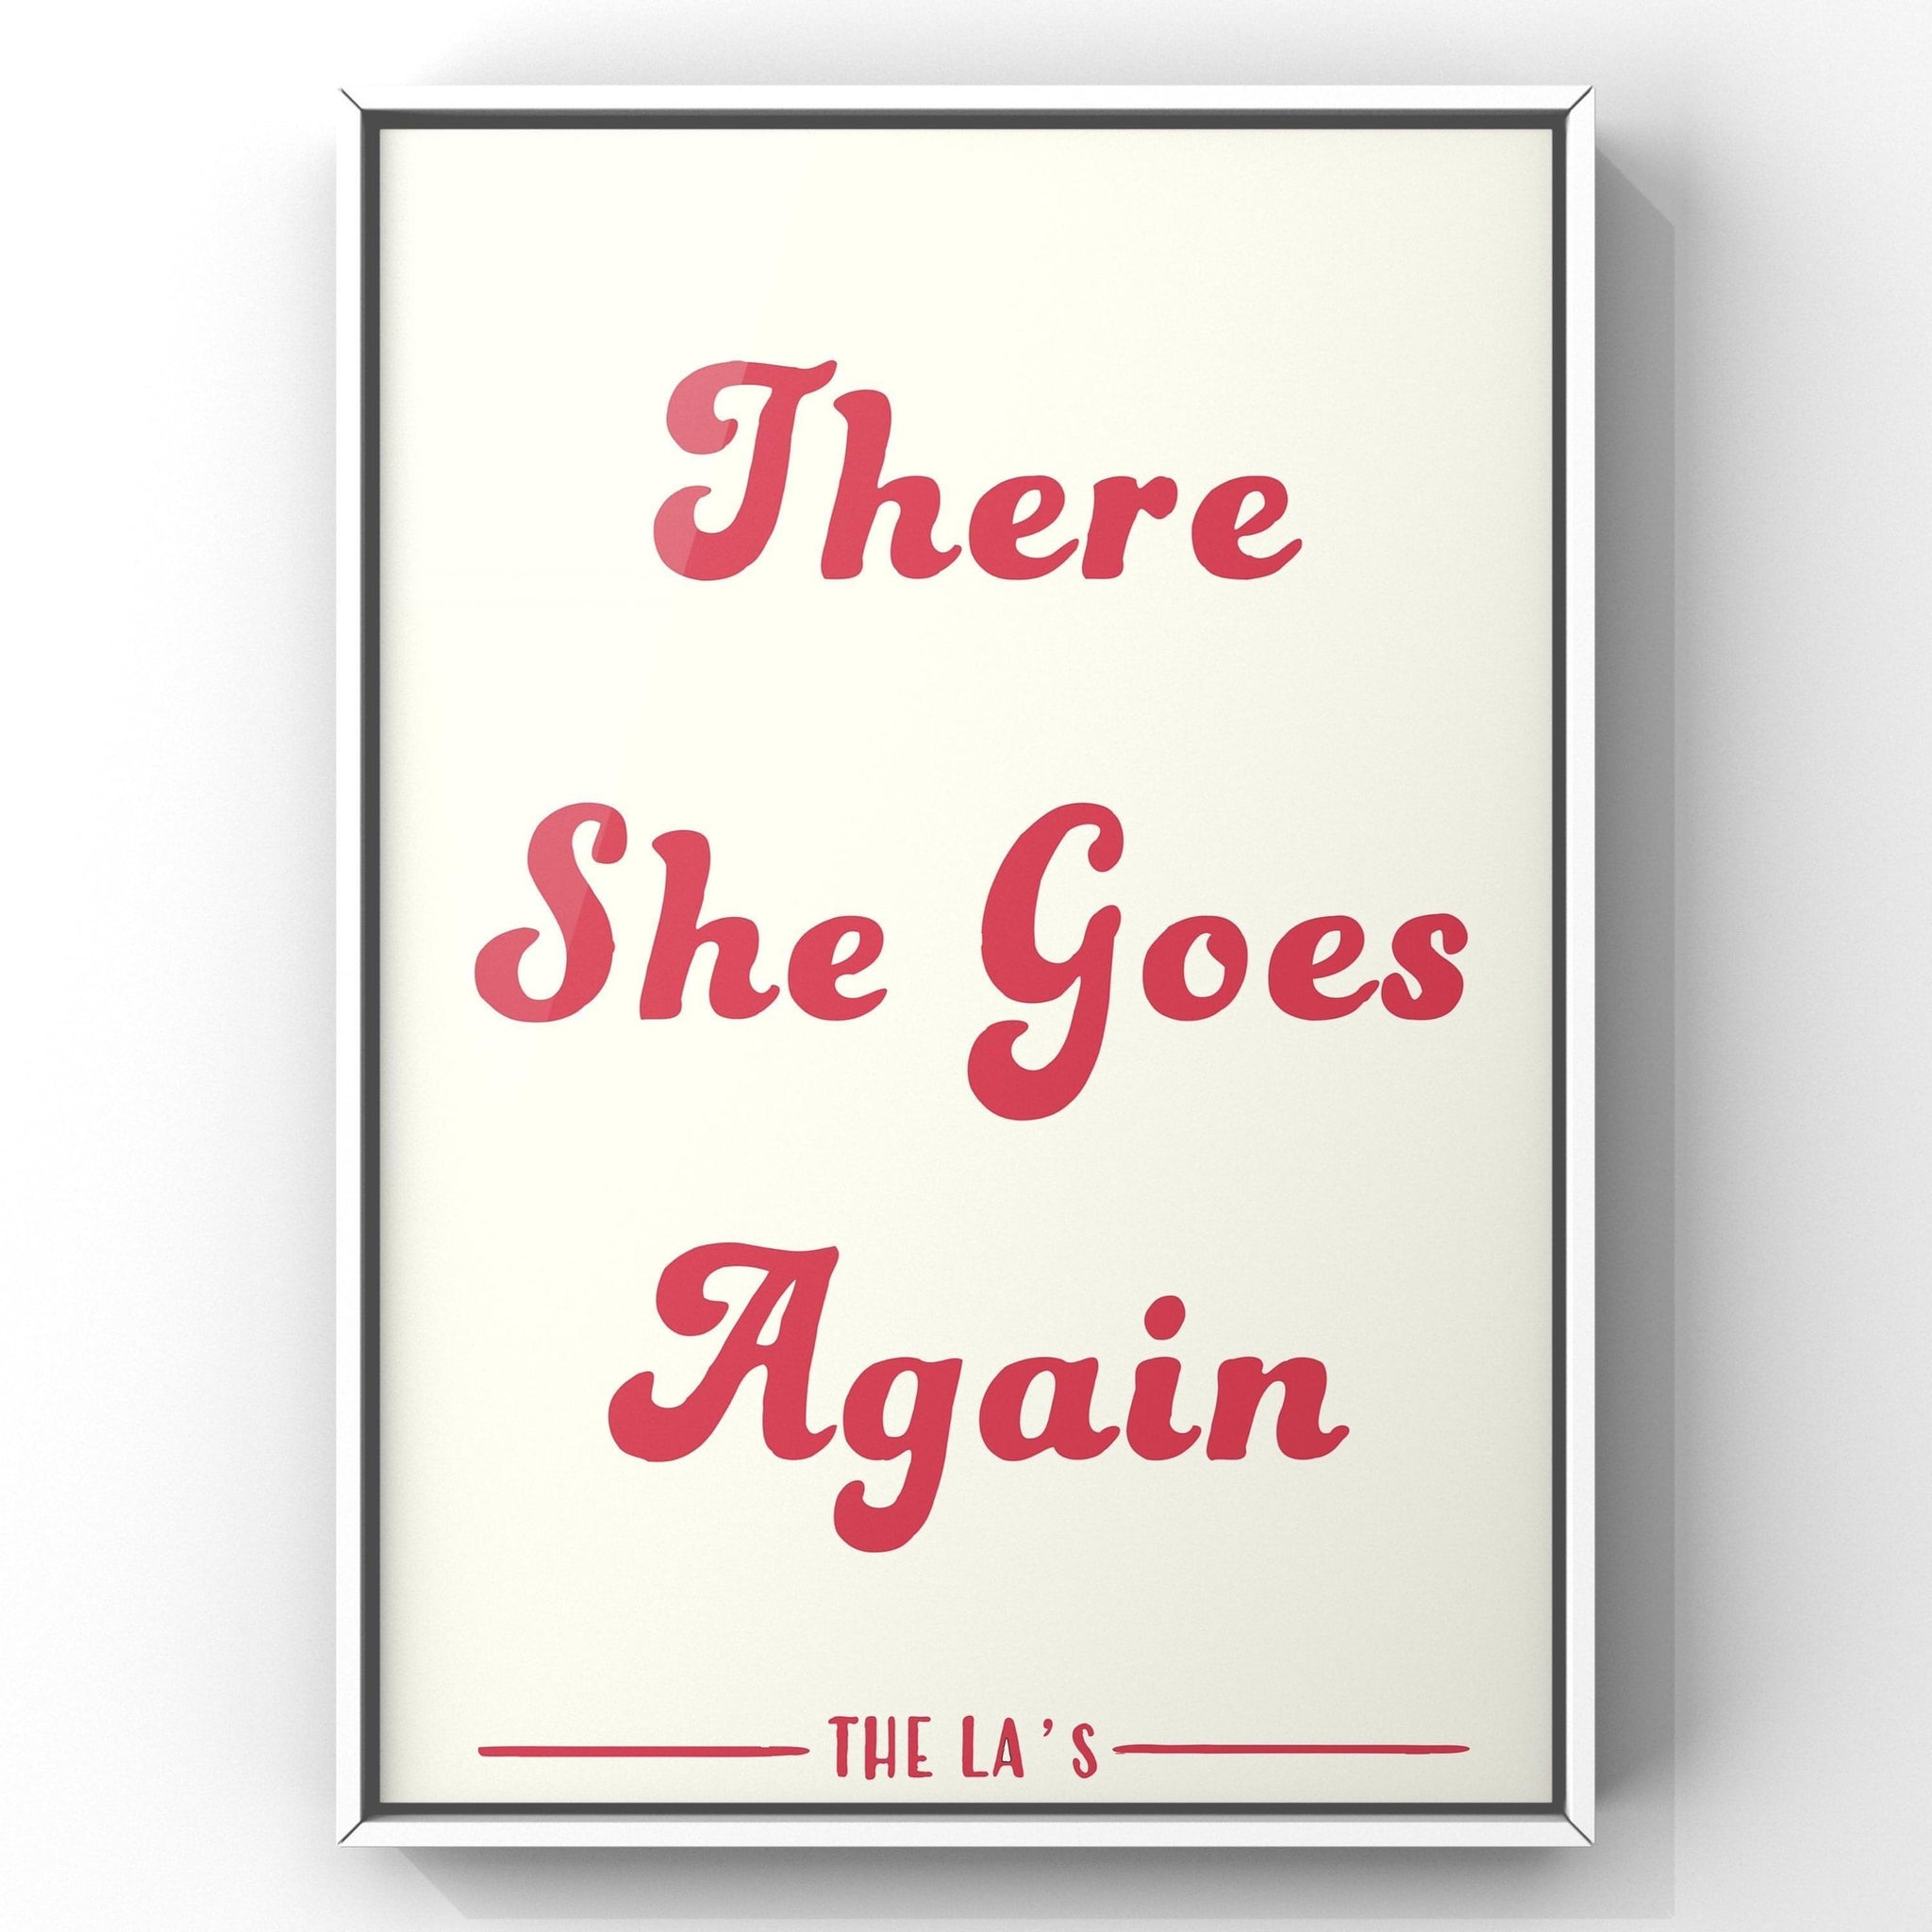 There She Goes Again by The La's – Wes Doodle